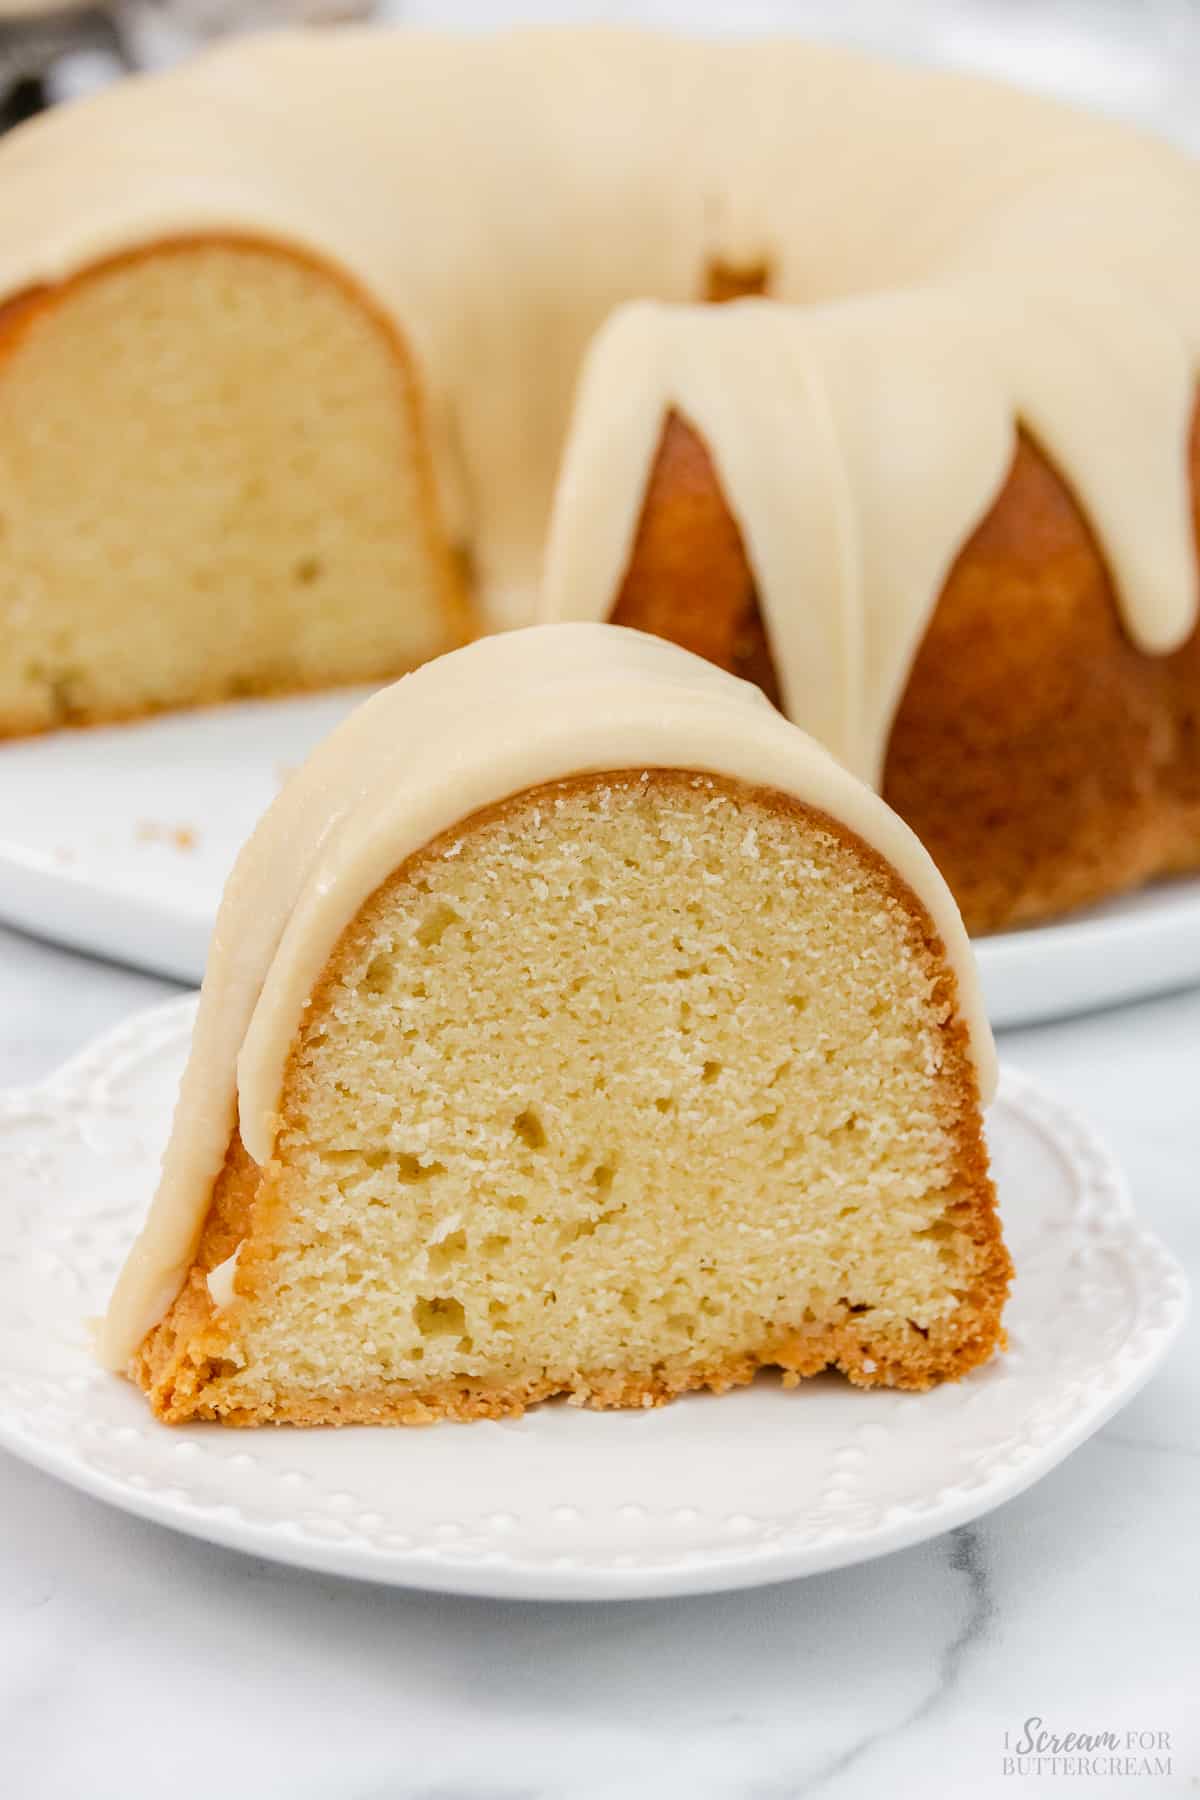 Large slice of vanilla bundt cake made with buttercream on a white plate.